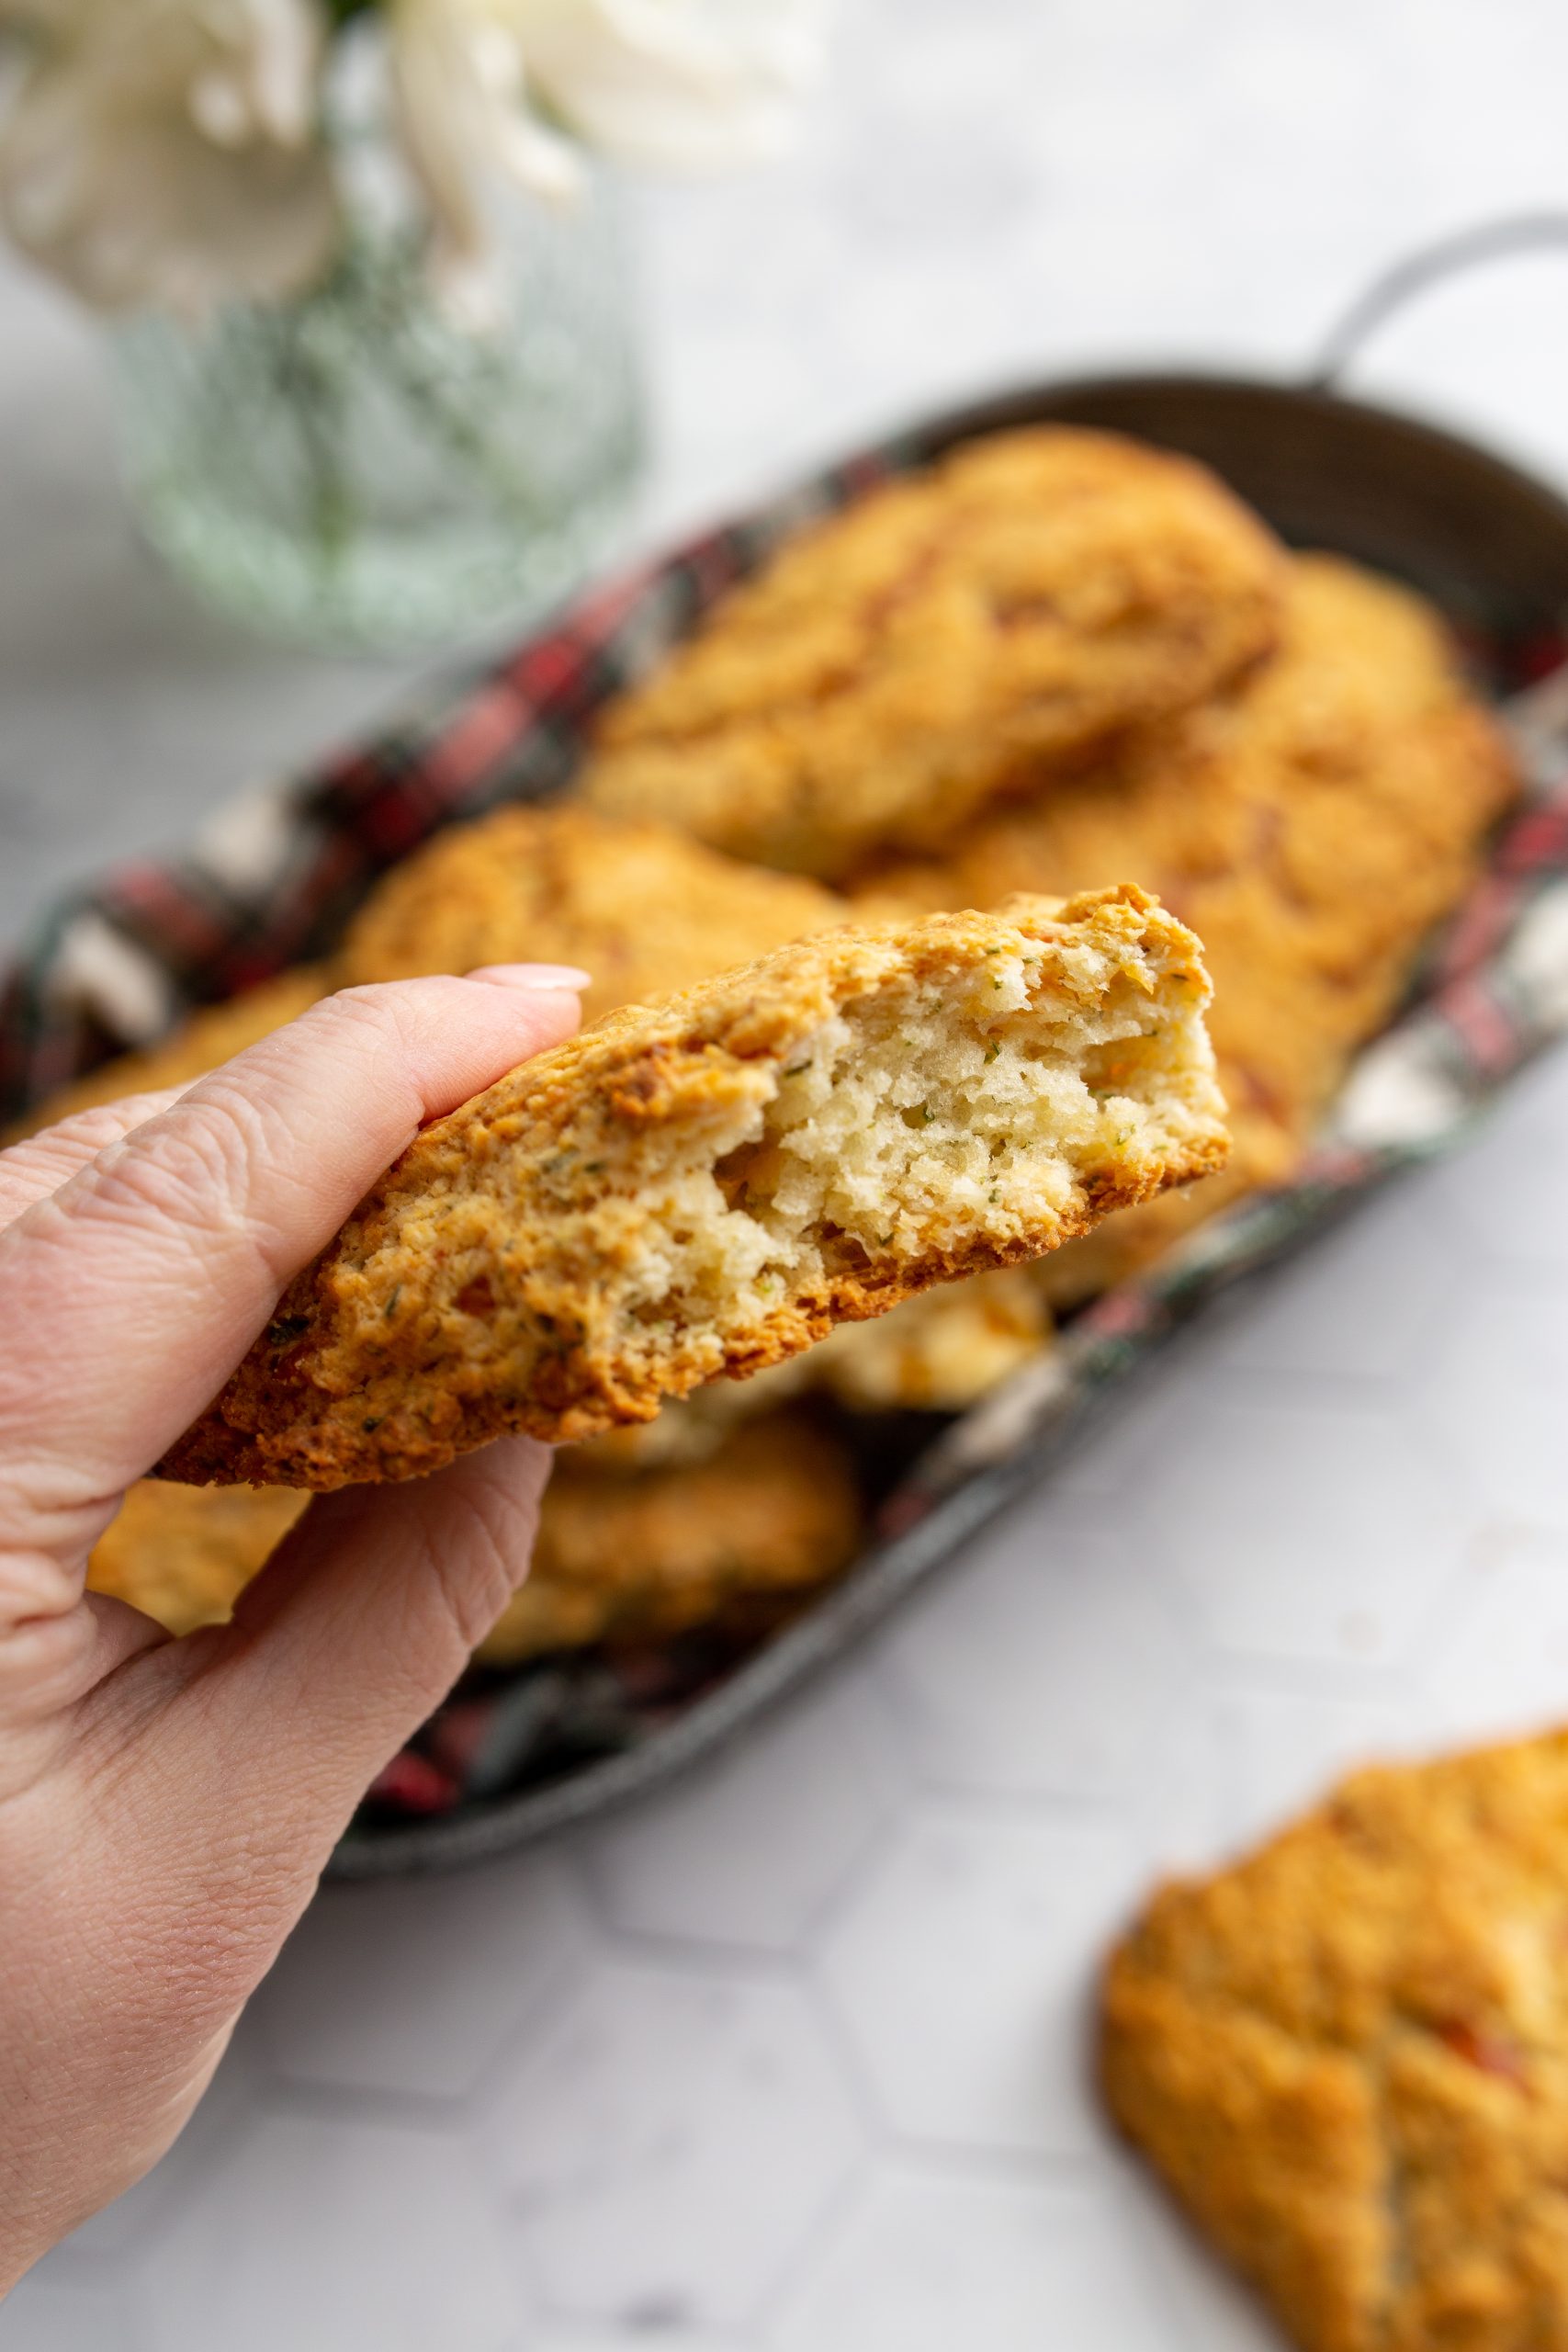 Close-up of a hand holding a half-eaten Cheddar Herb Scones, showing the crumbly interior. A tray filled with more scones and a vase of white flowers are in the background.